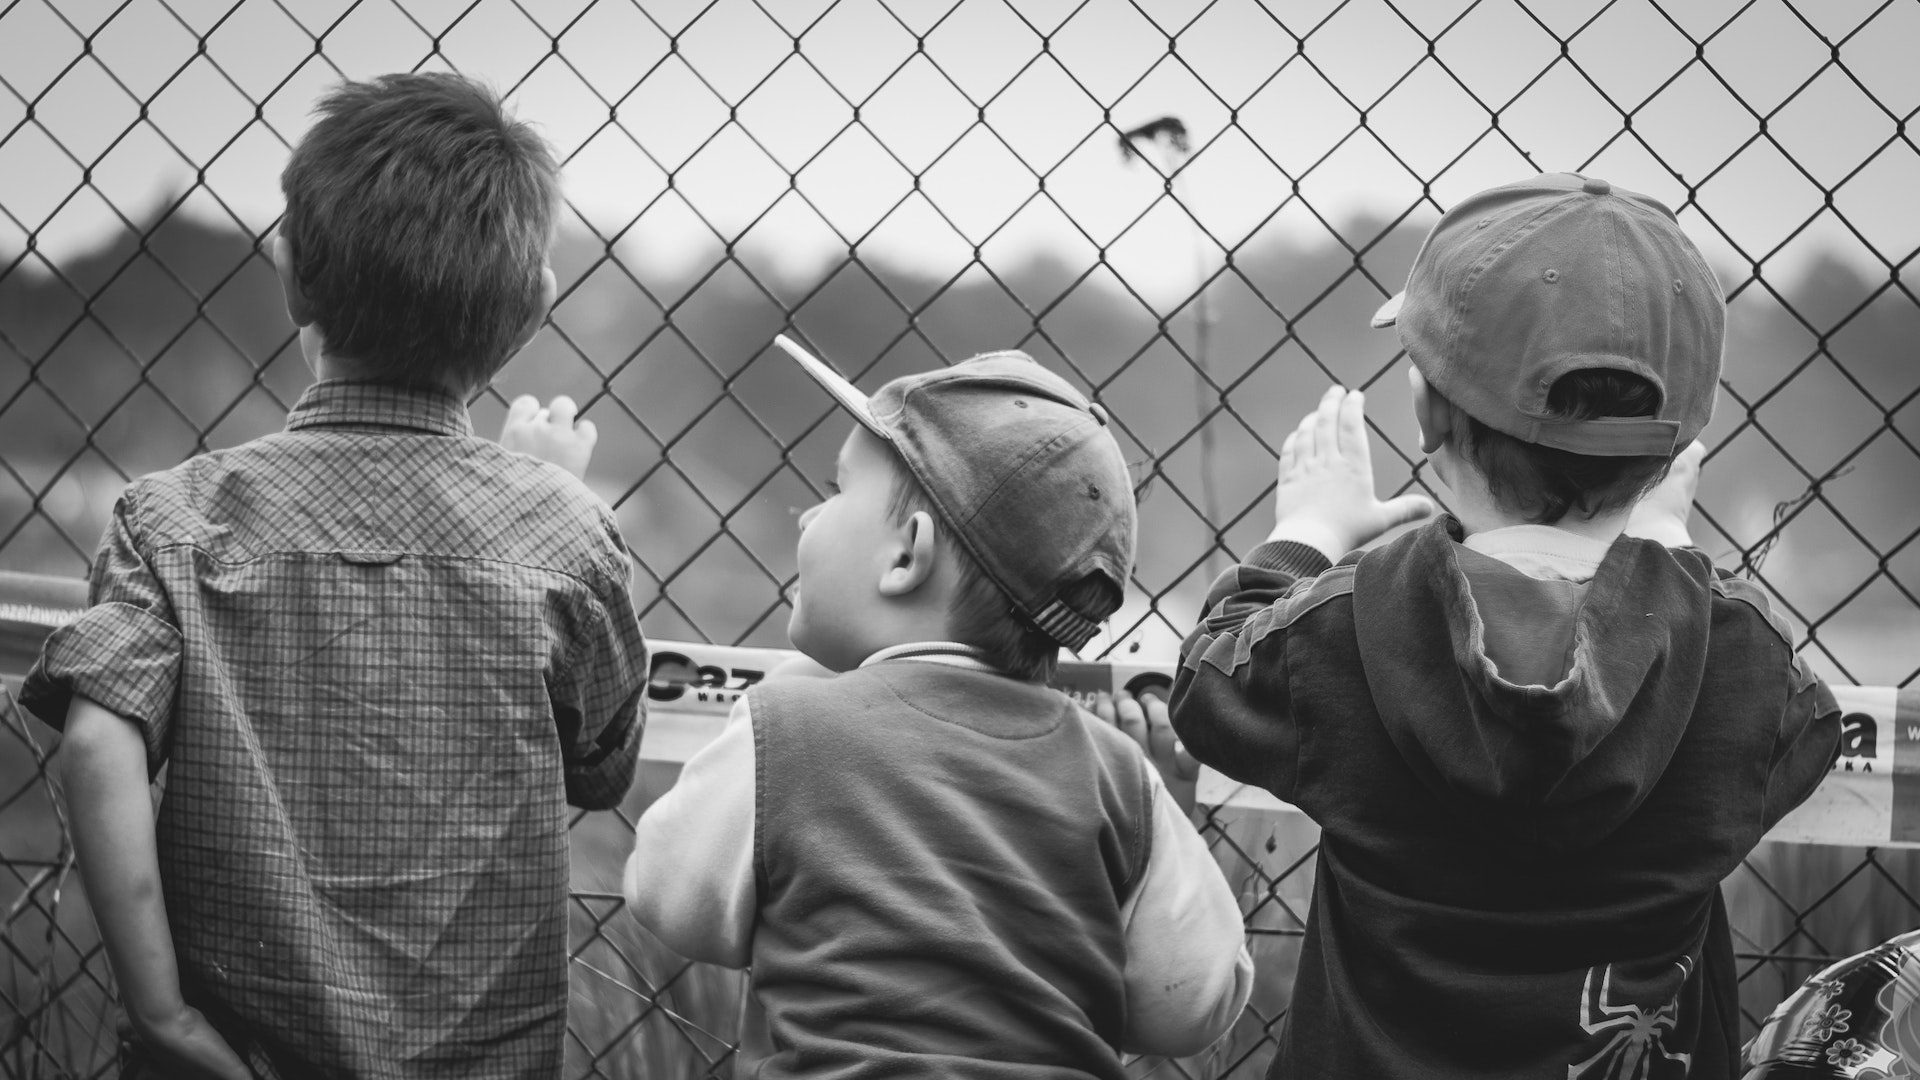 Three boys stand against a chain link fence